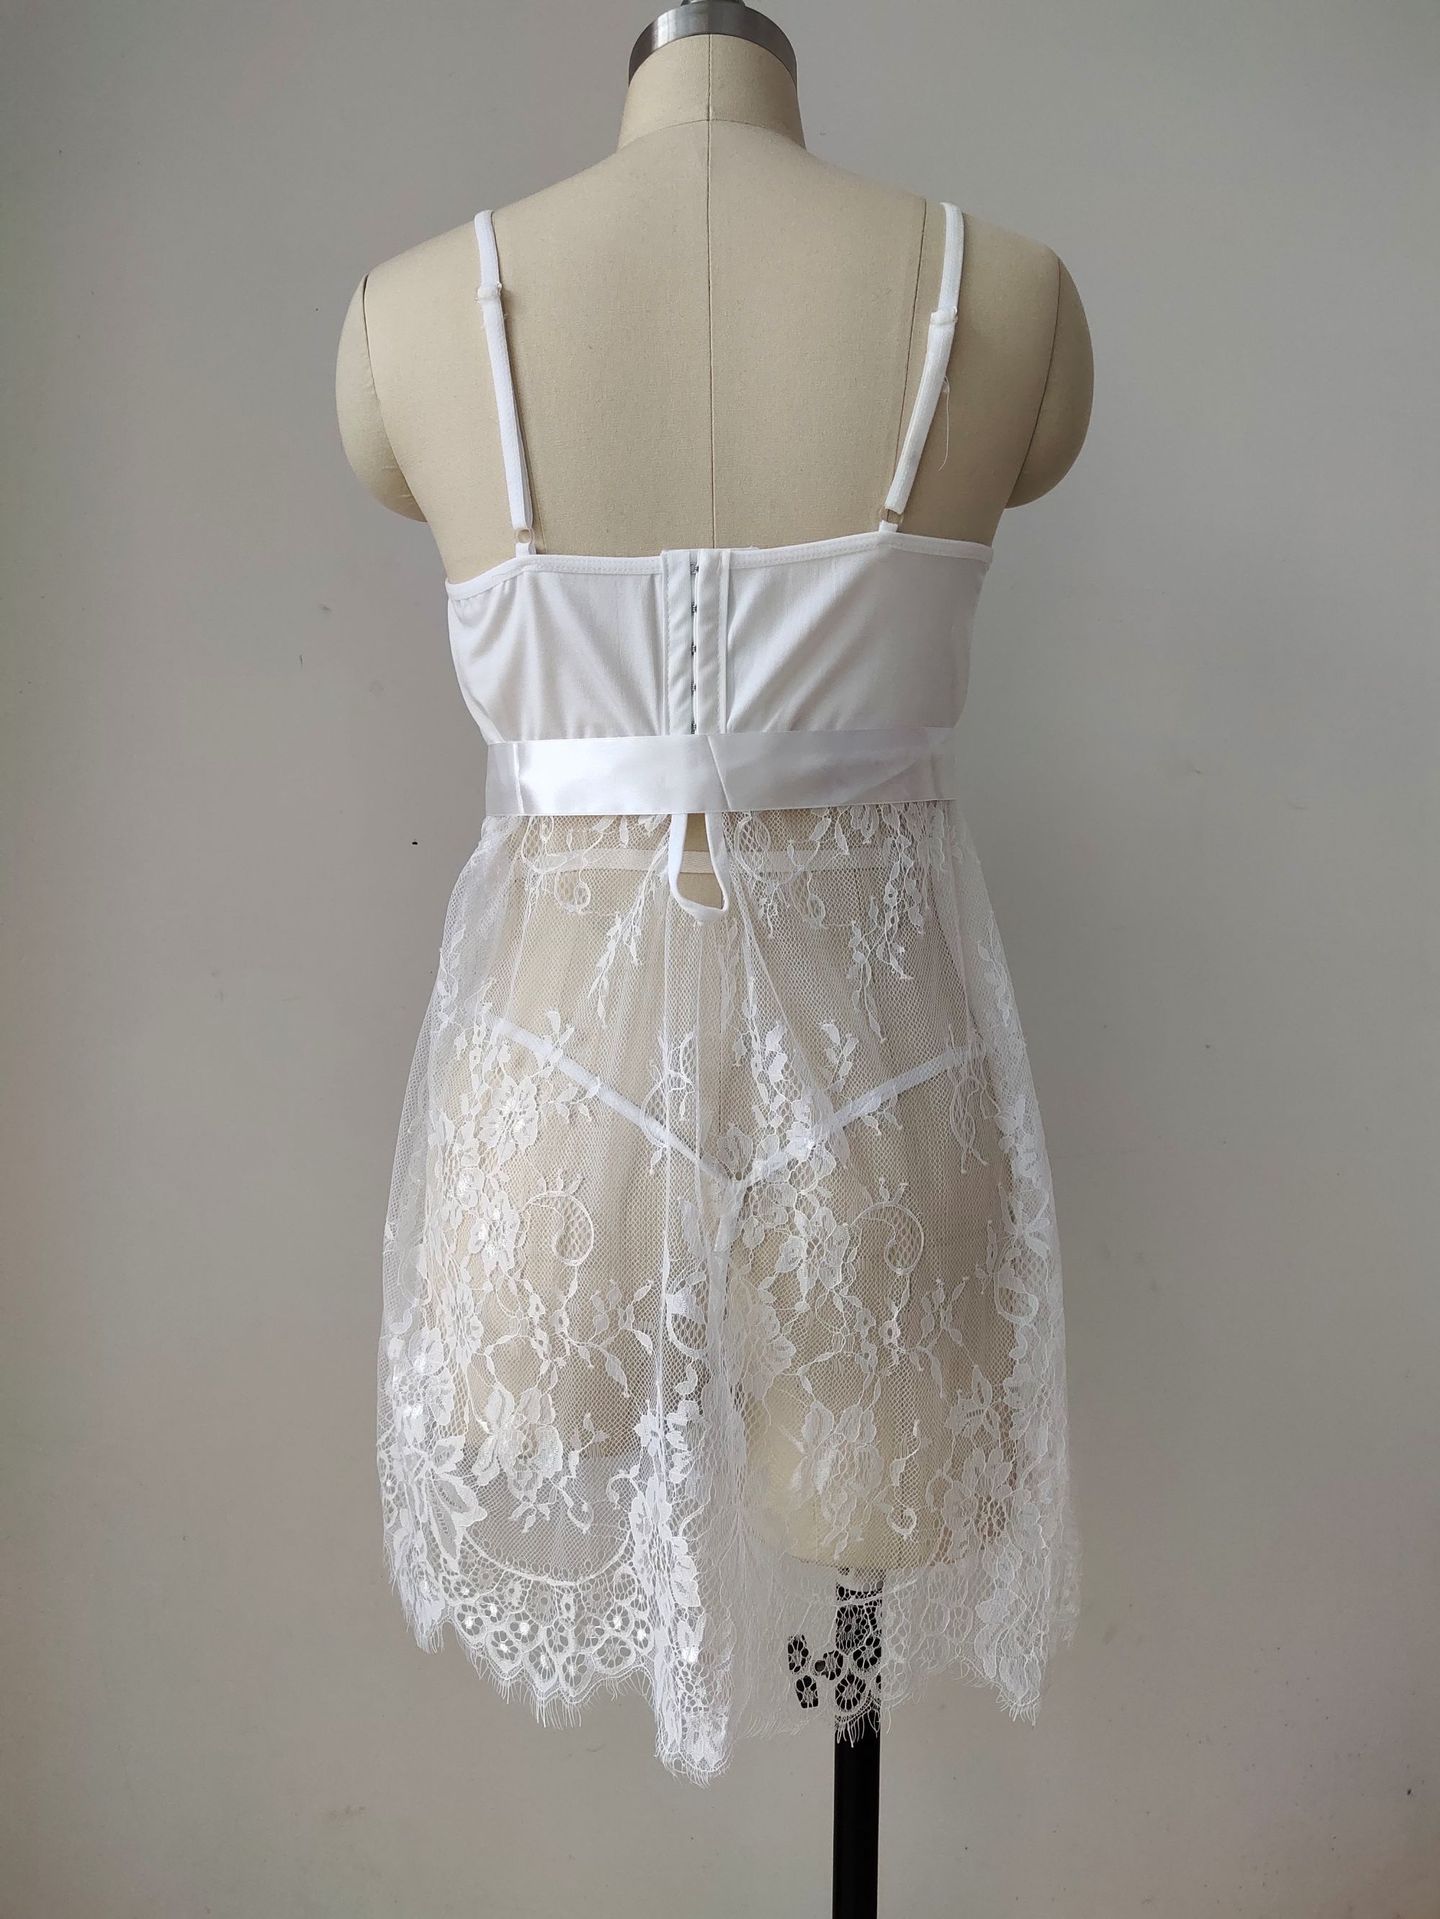 Products in Stock New Summer Breathable Sleeveless Lace Sexy Charming Nightdress Women's Sexy Underwear Agent to Join